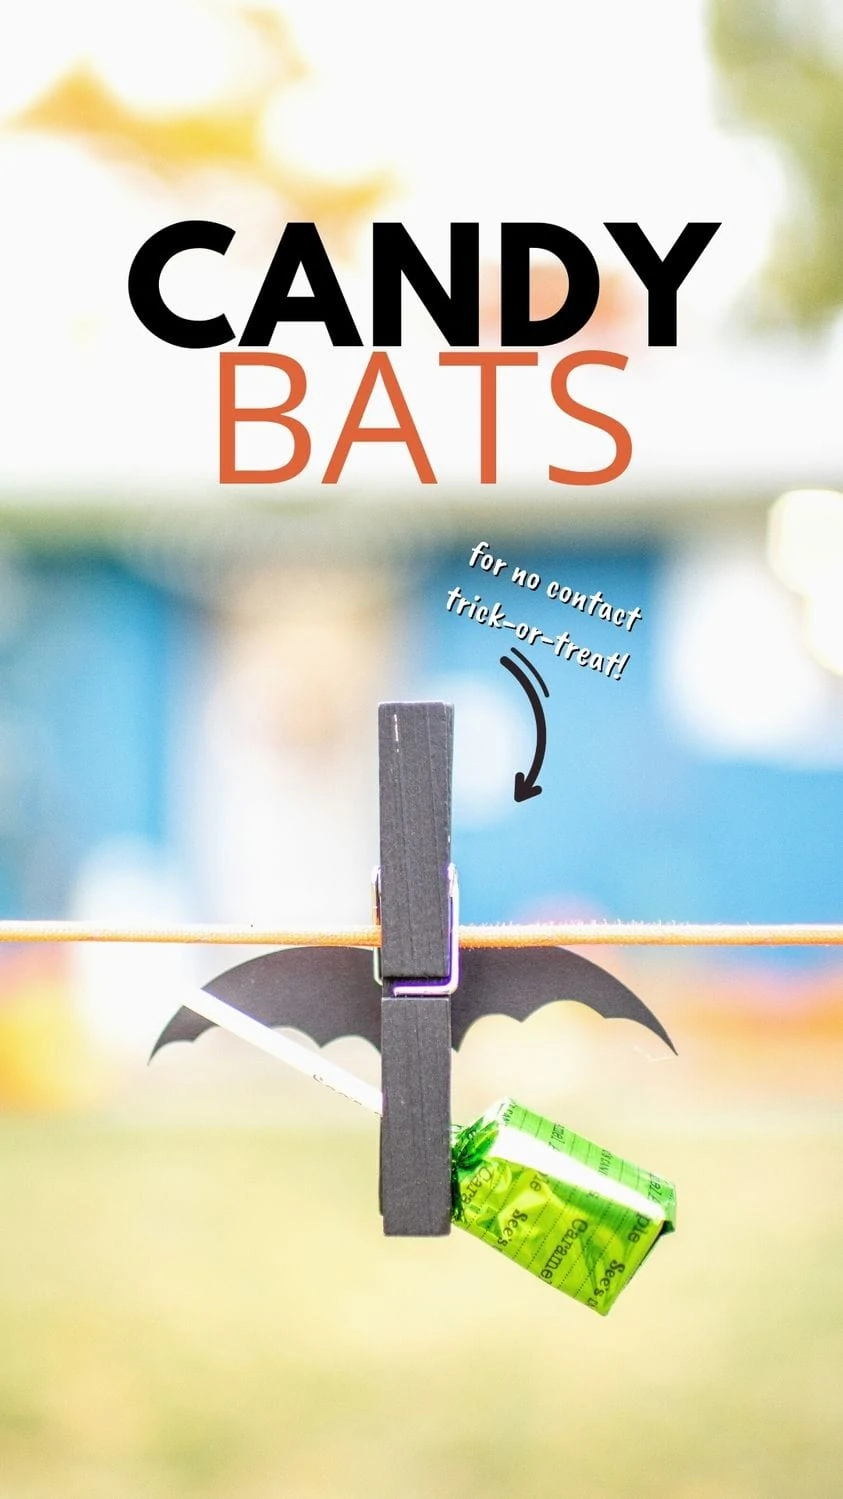 Candy bats clipped on a clothesline at the front of your yard is the perfect solution for a no contact halloween with trick or treating